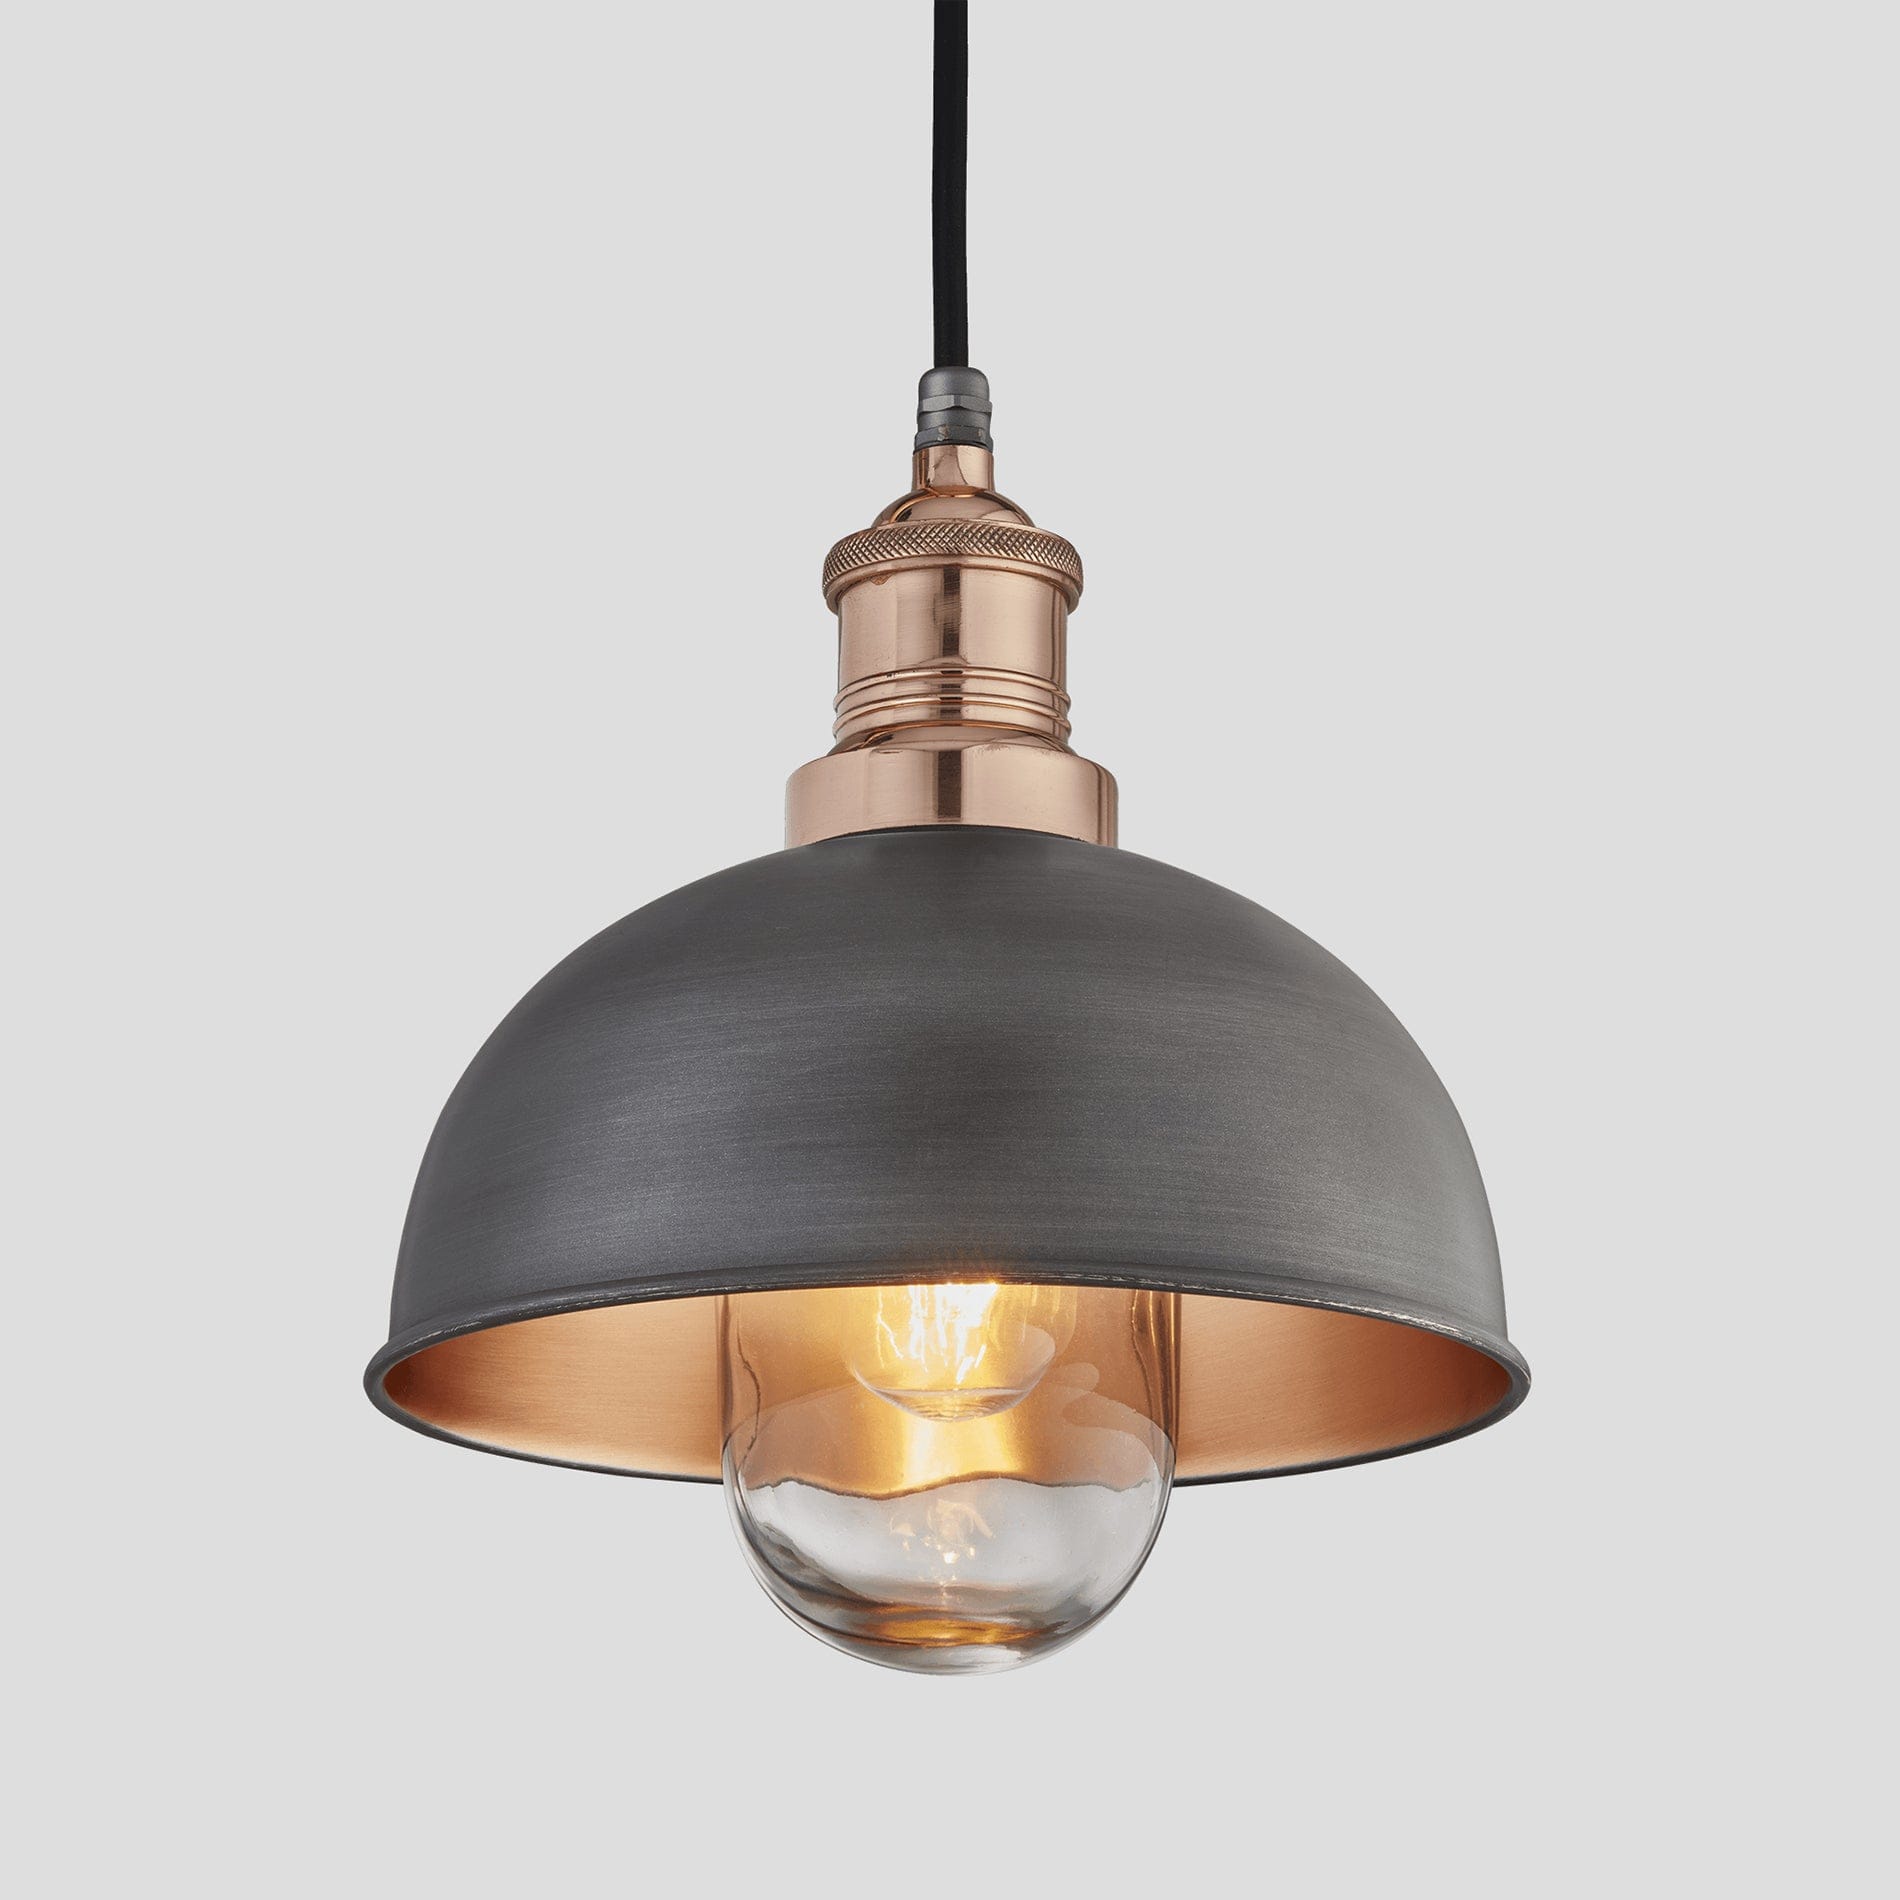 Brooklyn Outdoor & Bathroom Dome Pendant - 8 Inch - Pewter & Copper Industville BR-IP65-DP8-CP-CH